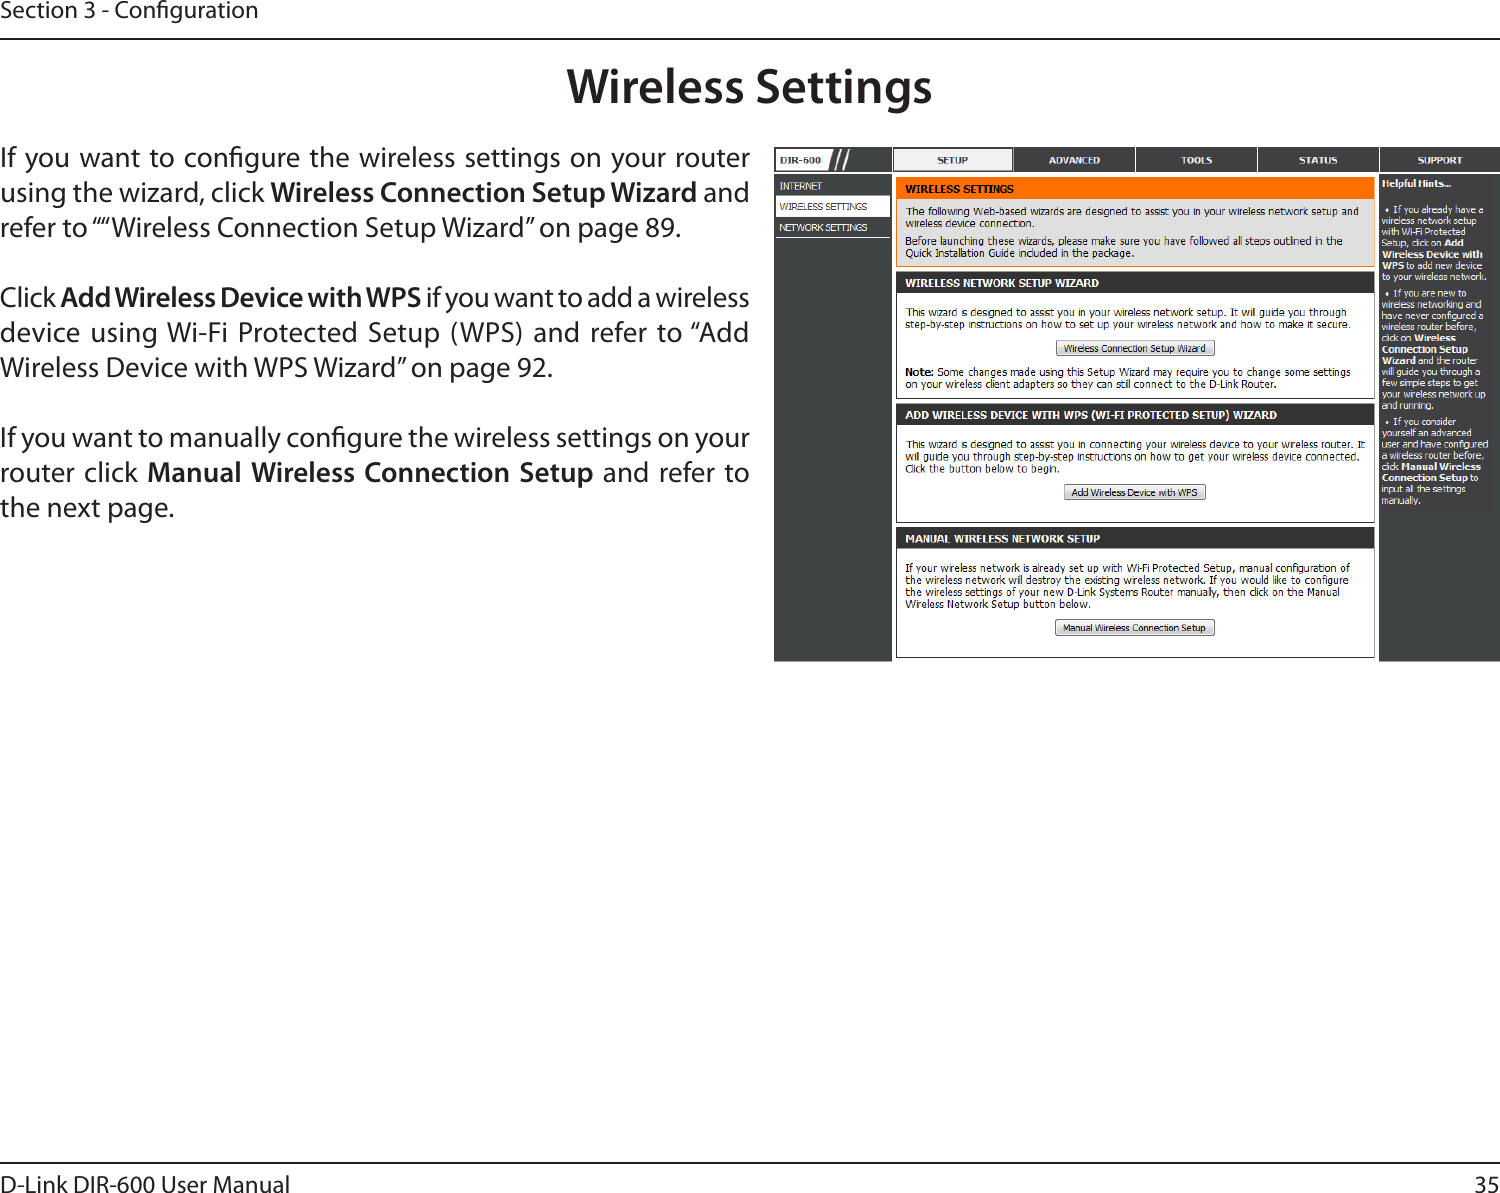 35D-Link DIR-600 User ManualSection 3 - CongurationWireless SettingsIf you want to congure the wireless settings on your router using the wizard, click Wireless Connection Setup Wizard and refer to ““Wireless Connection Setup Wizard” on page 89.Click Add Wireless Device with WPS if you want to add a wireless device using Wi-Fi  Protected Setup (WPS)  and refer to “Add Wireless Device with WPS Wizard” on page 92.If you want to manually congure the wireless settings on your router click  Manual Wireless Connection Setup  and refer to the next page.